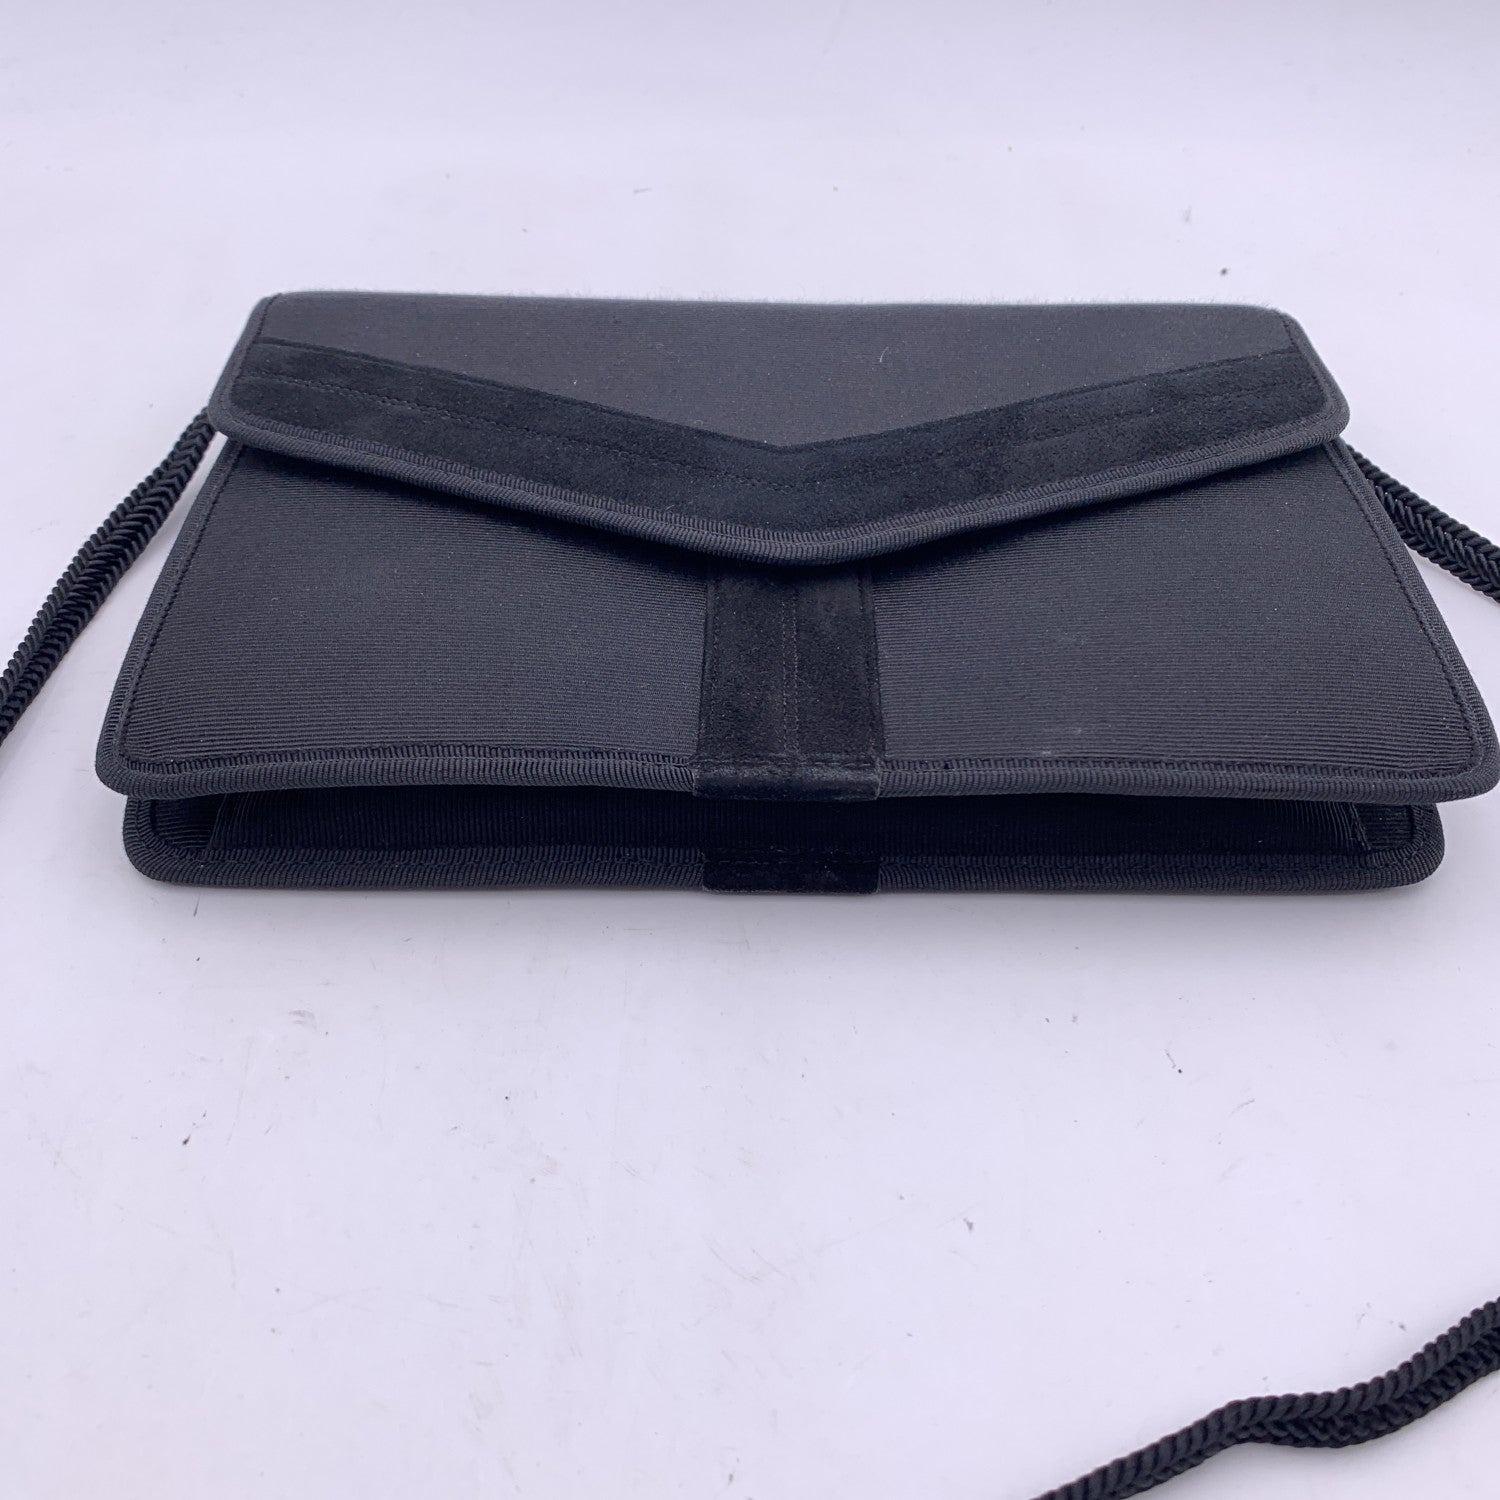 Yves Saint Laurent evening bag in black grosgrain fabric with suede Y on the front. Flap with magnetic button closure. Black fabric lining. 1 side open pocket inside.'Yves Saint Laurent - Made in France' tag inside Condition A - EXCELLENT Gently